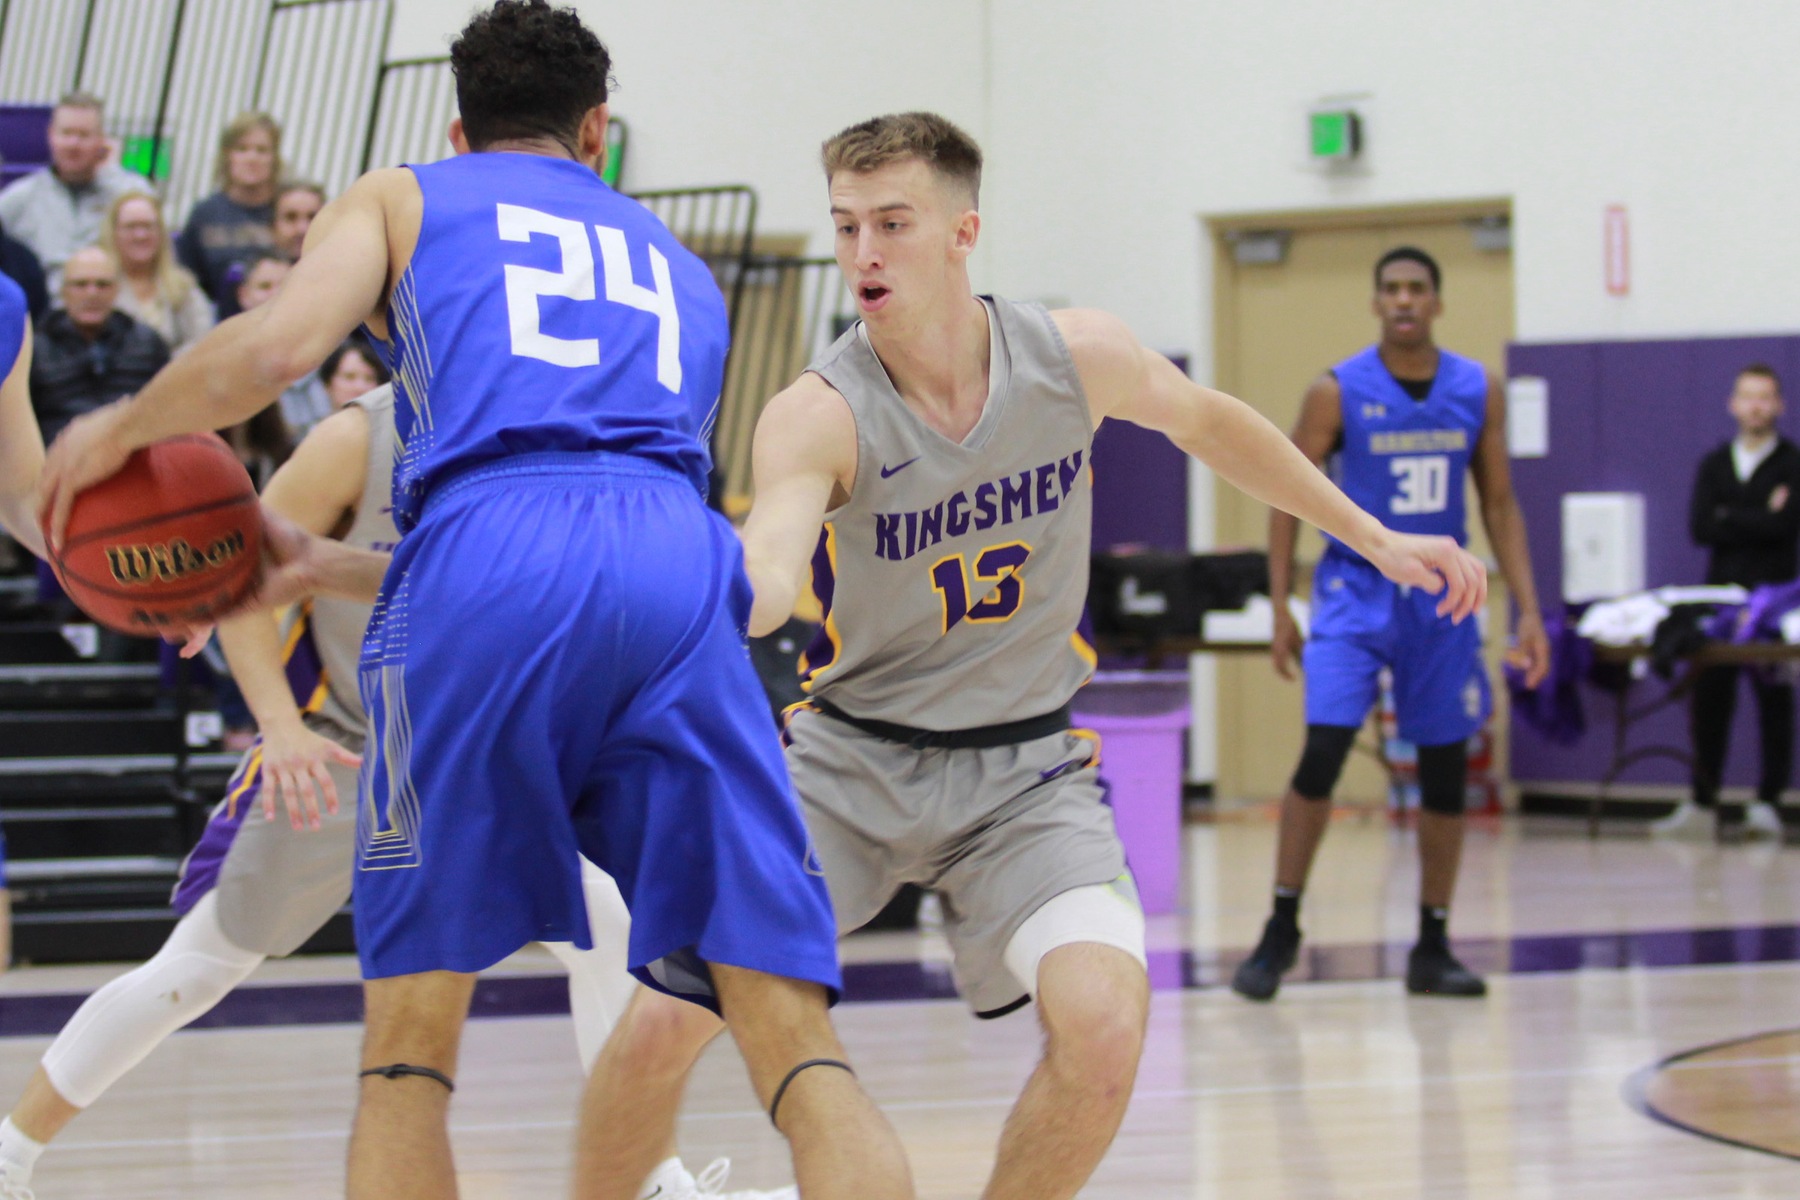 Clutch Free Throws, Stingy Defense Get Kingsmen Past Redlands; First SCIAC Win